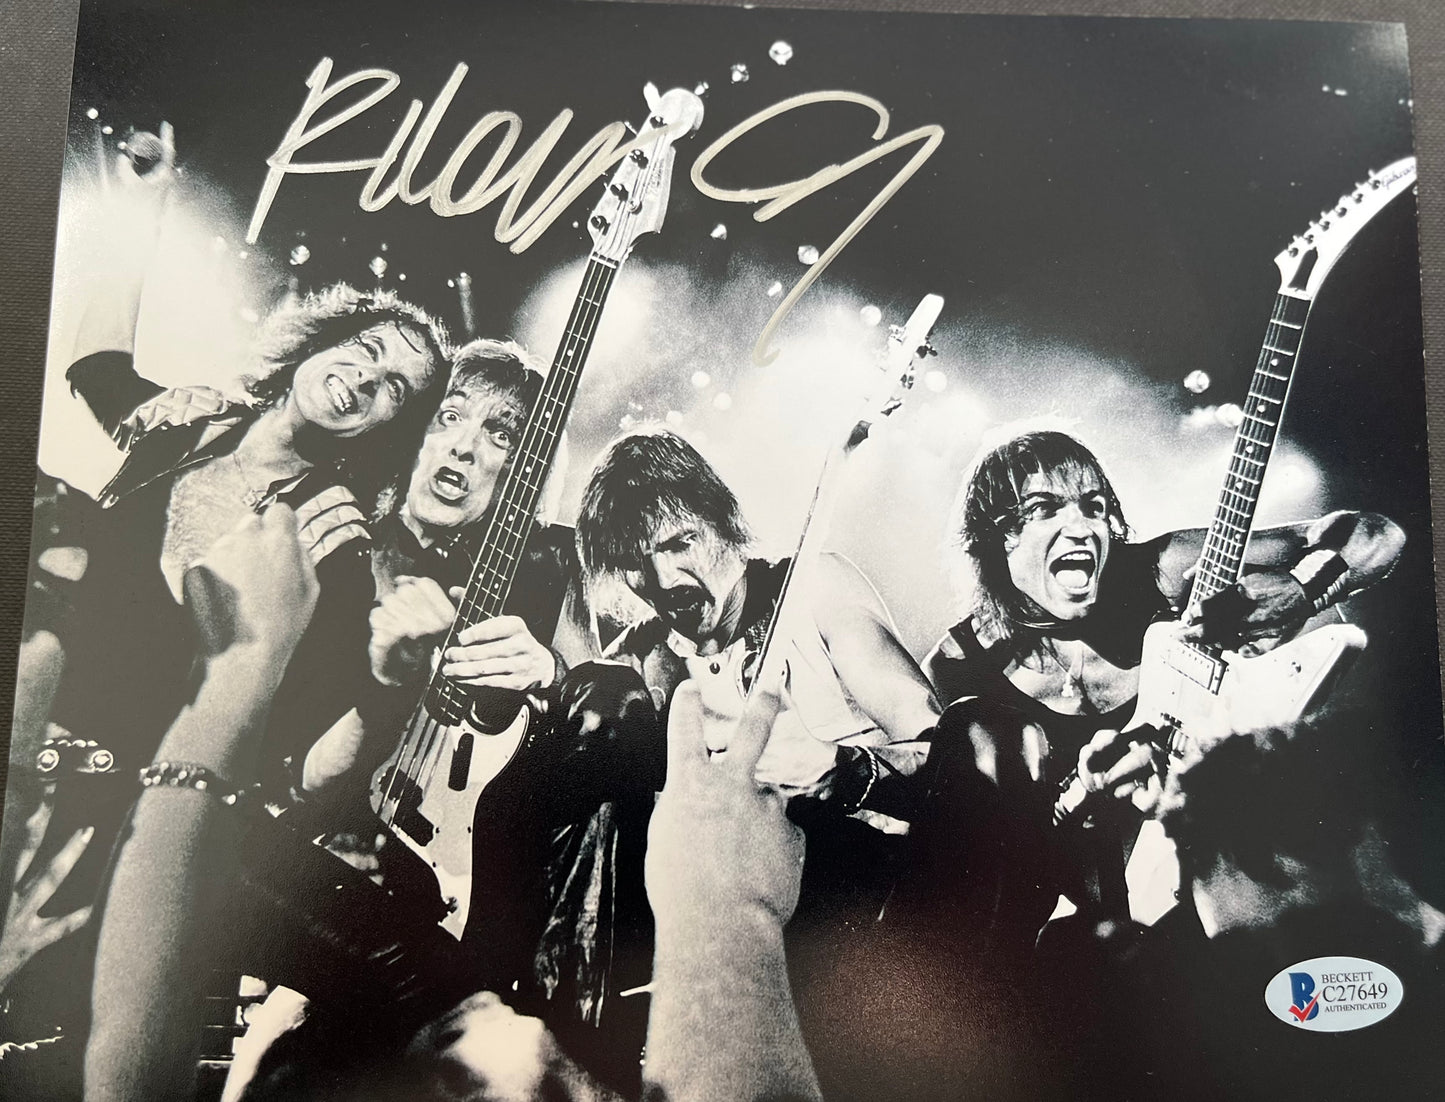 THE SCORPIONS RUDOLPH SCHENKER SIGNED 8X10